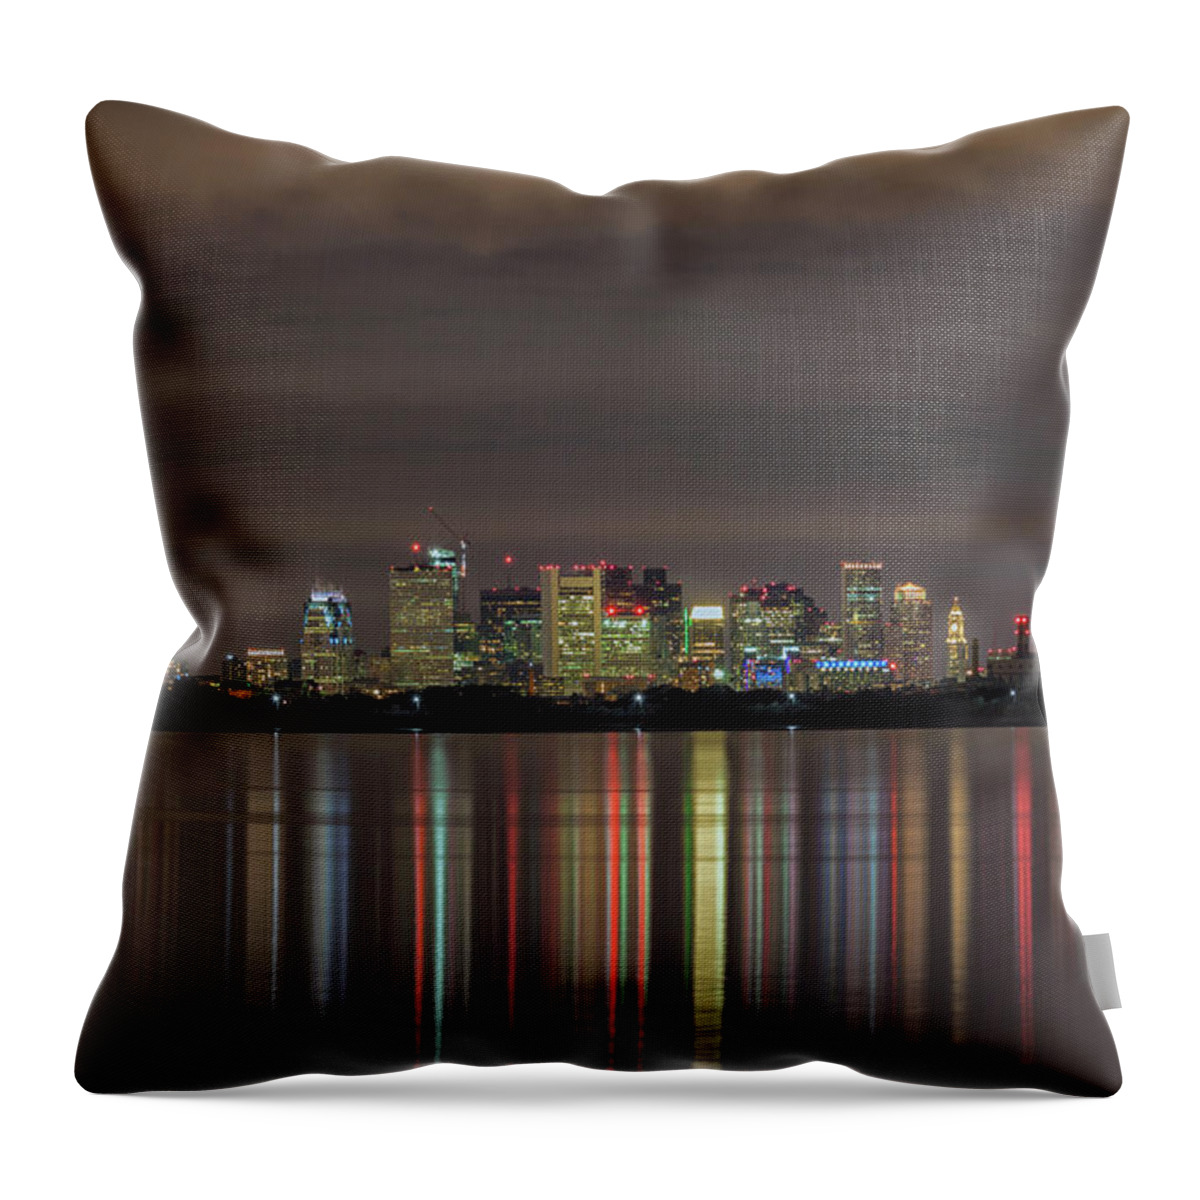 Boston Night Light Reflections Throw Pillow featuring the photograph Boston Night Light Reflections by Brian MacLean